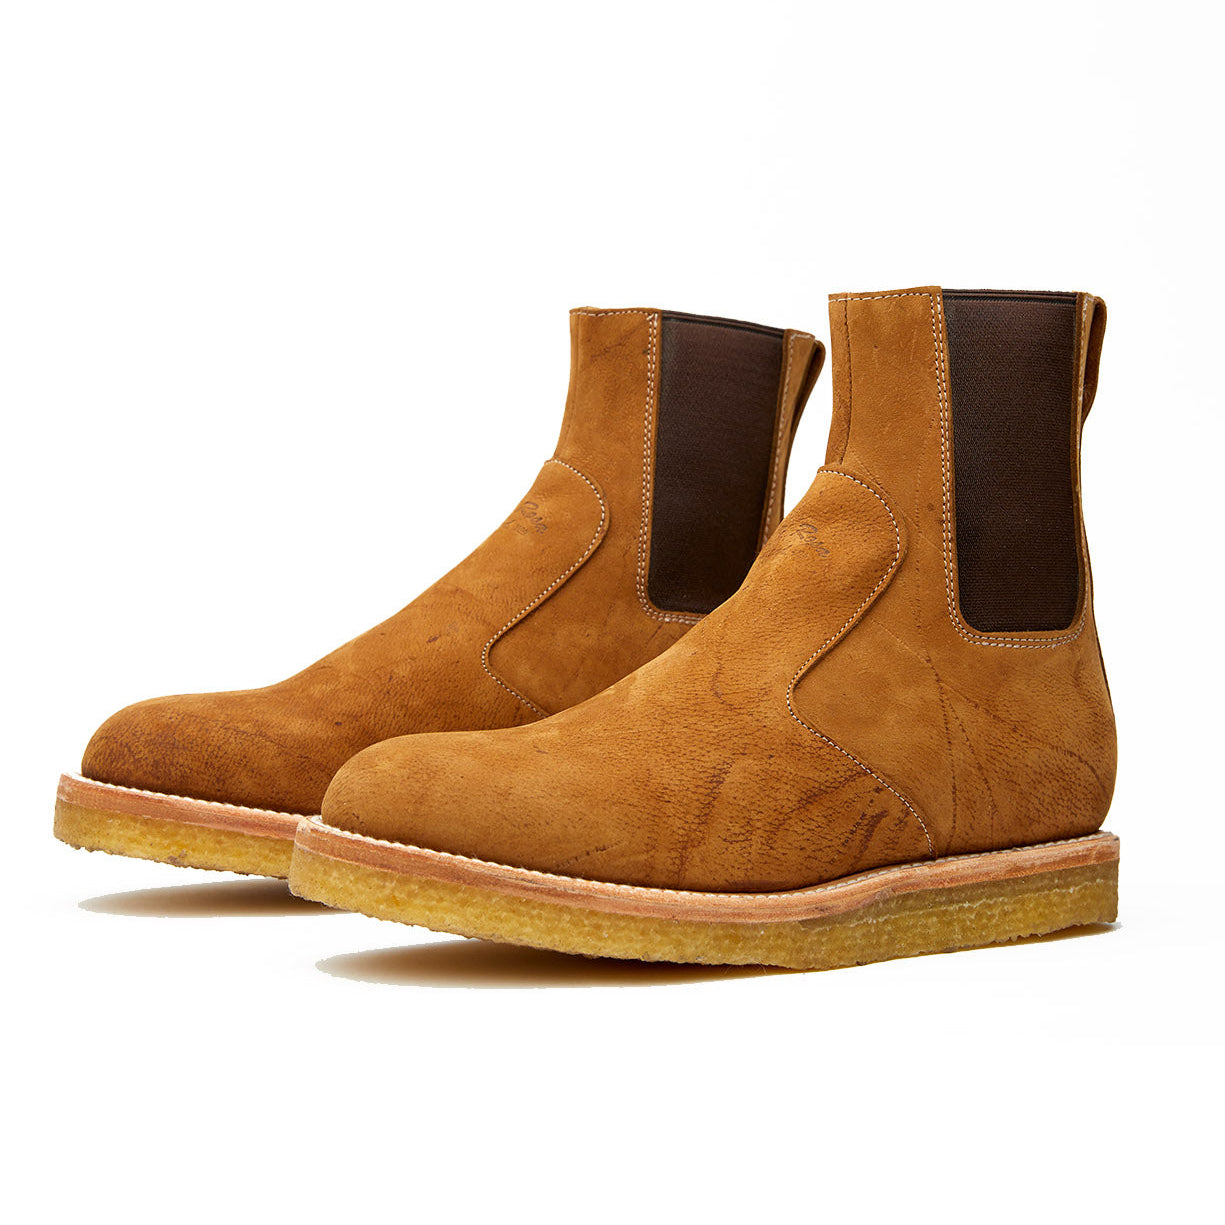 A pair of brown suede Santa Rosa Brand Stamford Boots with elastic side panels and a natural crepe outsole on a white background.